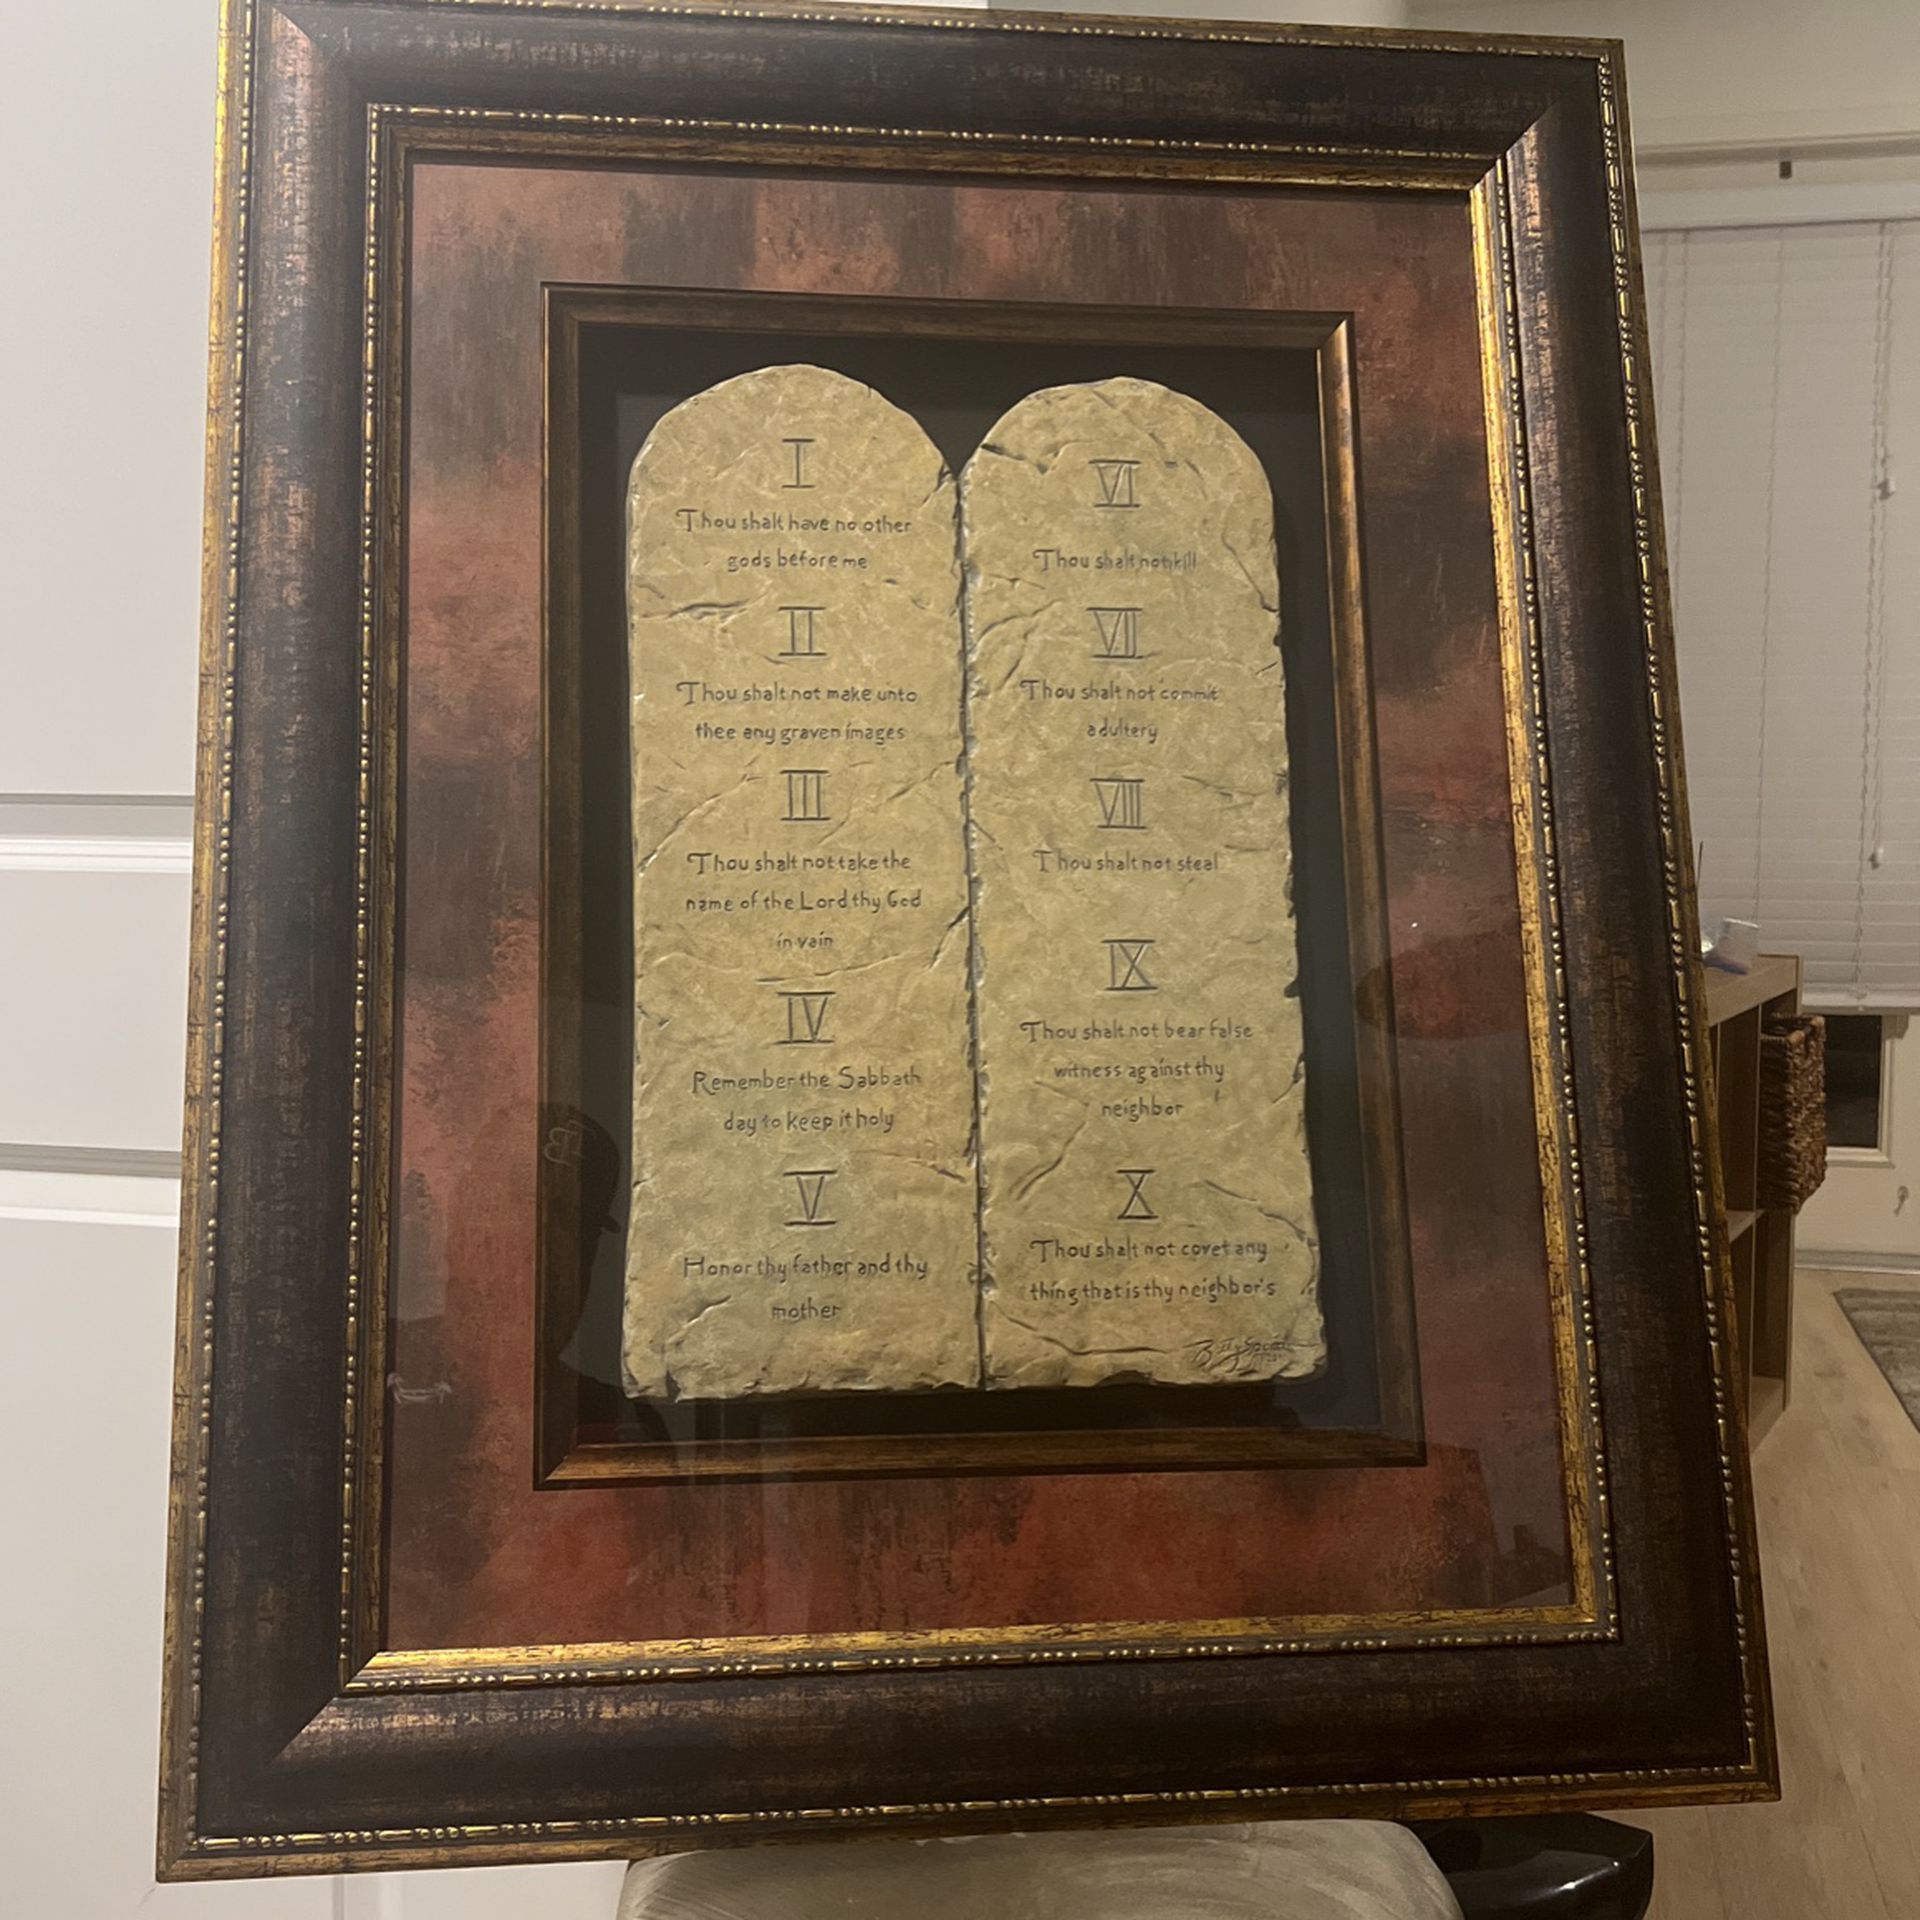 TEN COMMANDMENTS  IN VERY NICE PICTURE FRAME /REAL STONE TABLETS 29x37 FRAME